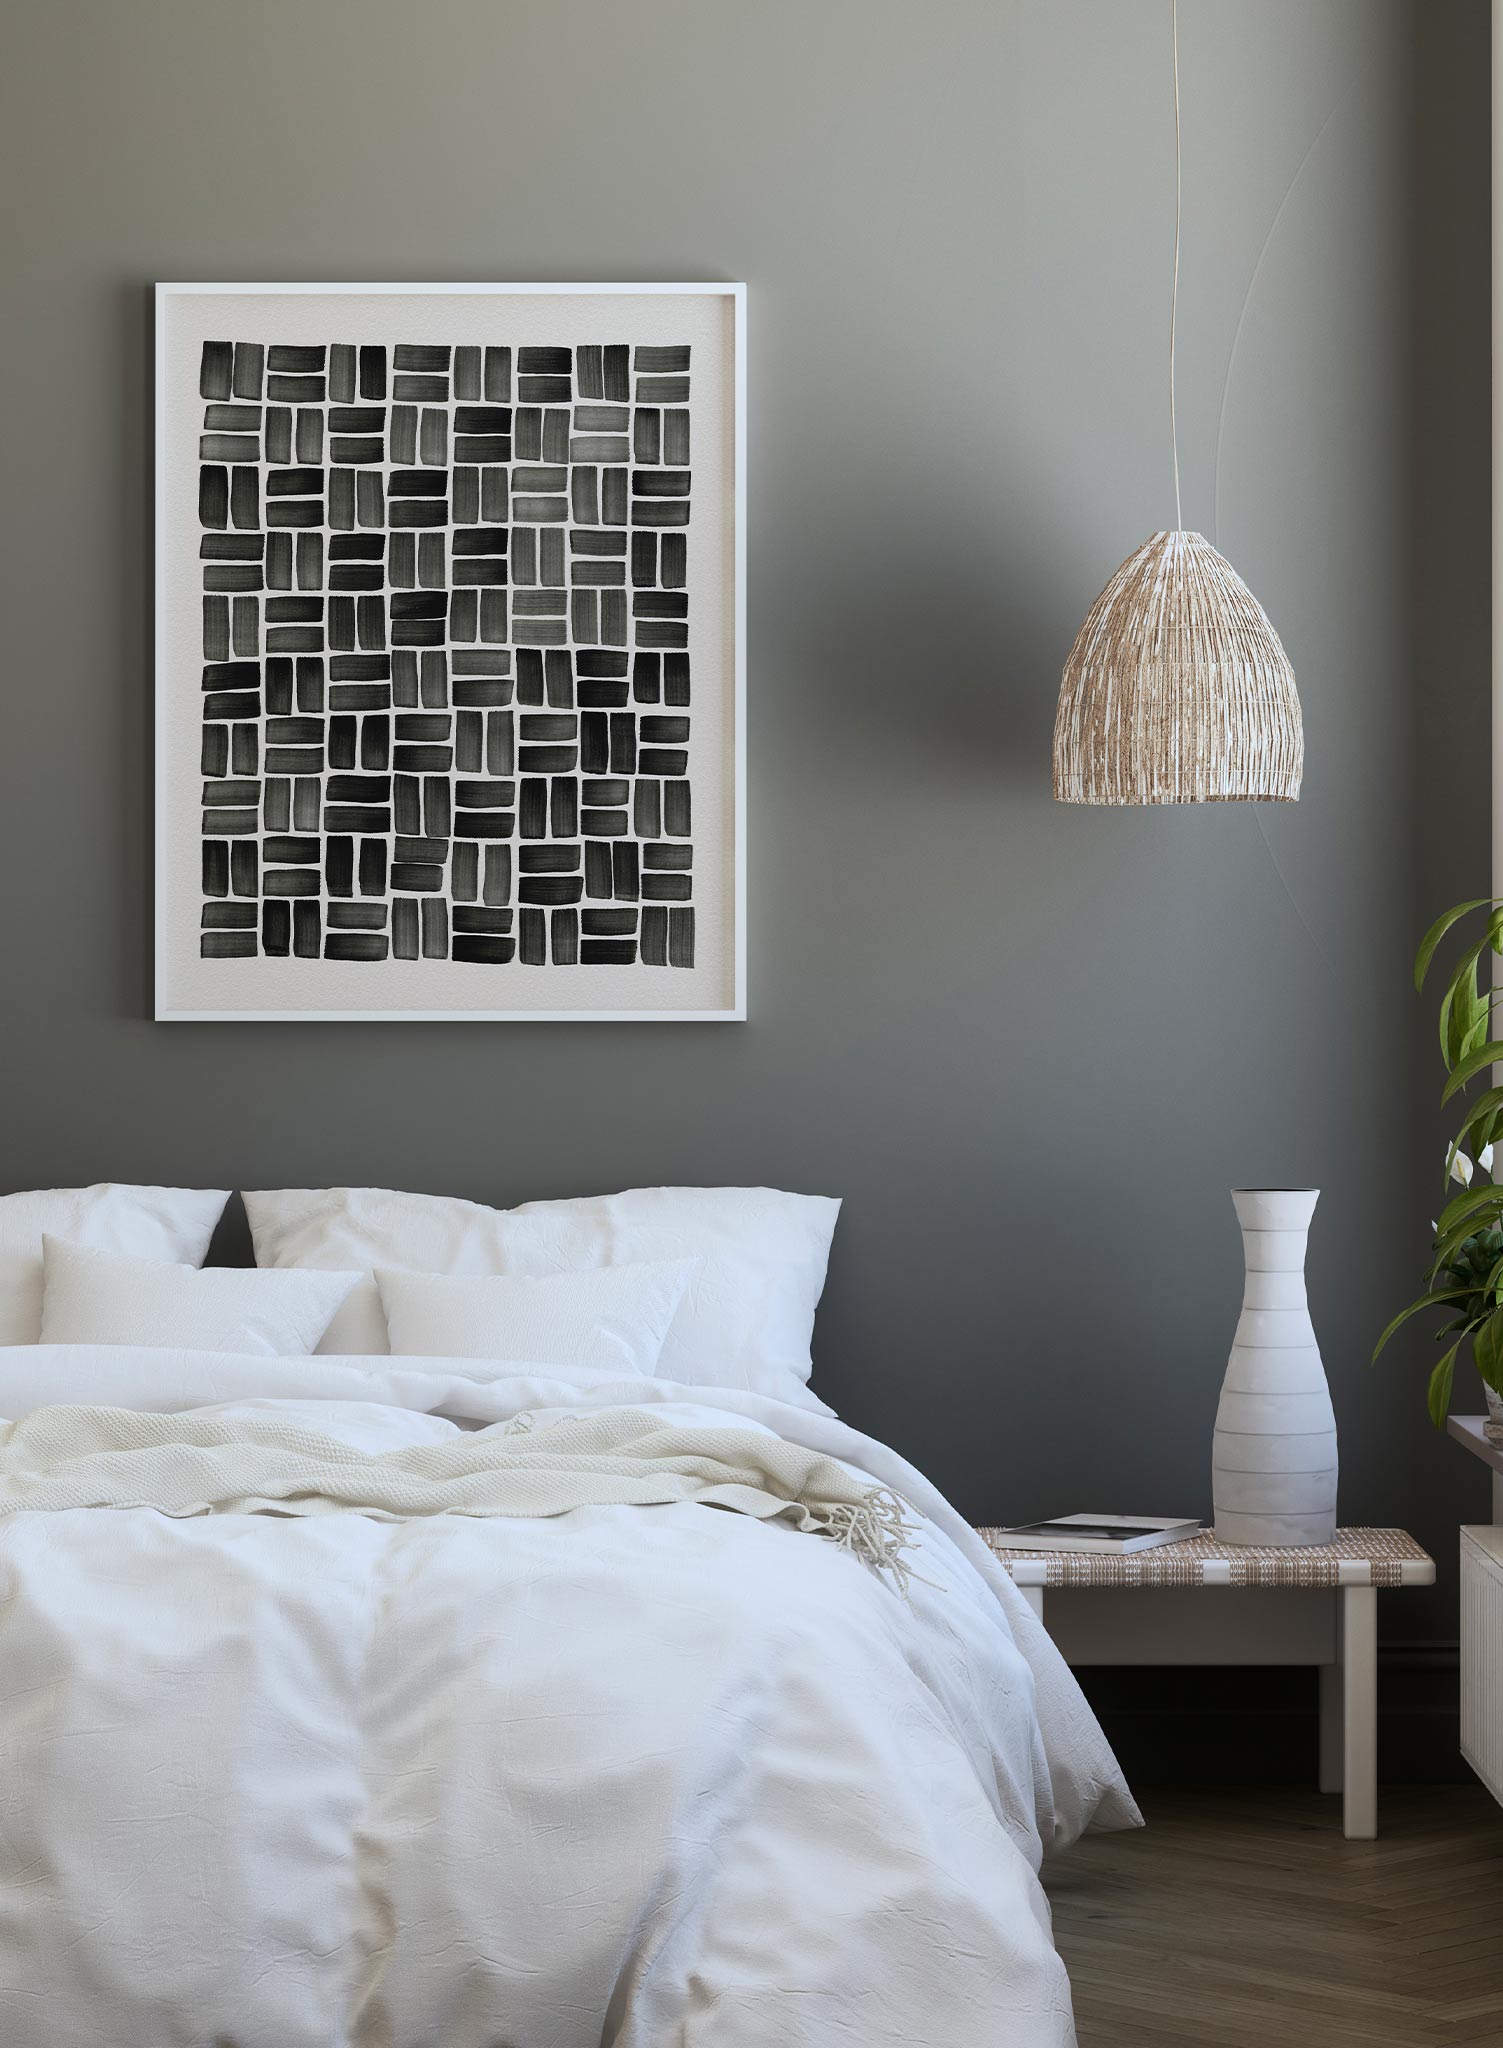 Linen Basket is a minimalist abstract illustration of a woven pattern made out of two rectangles in alternating direction by Opposite Wall.